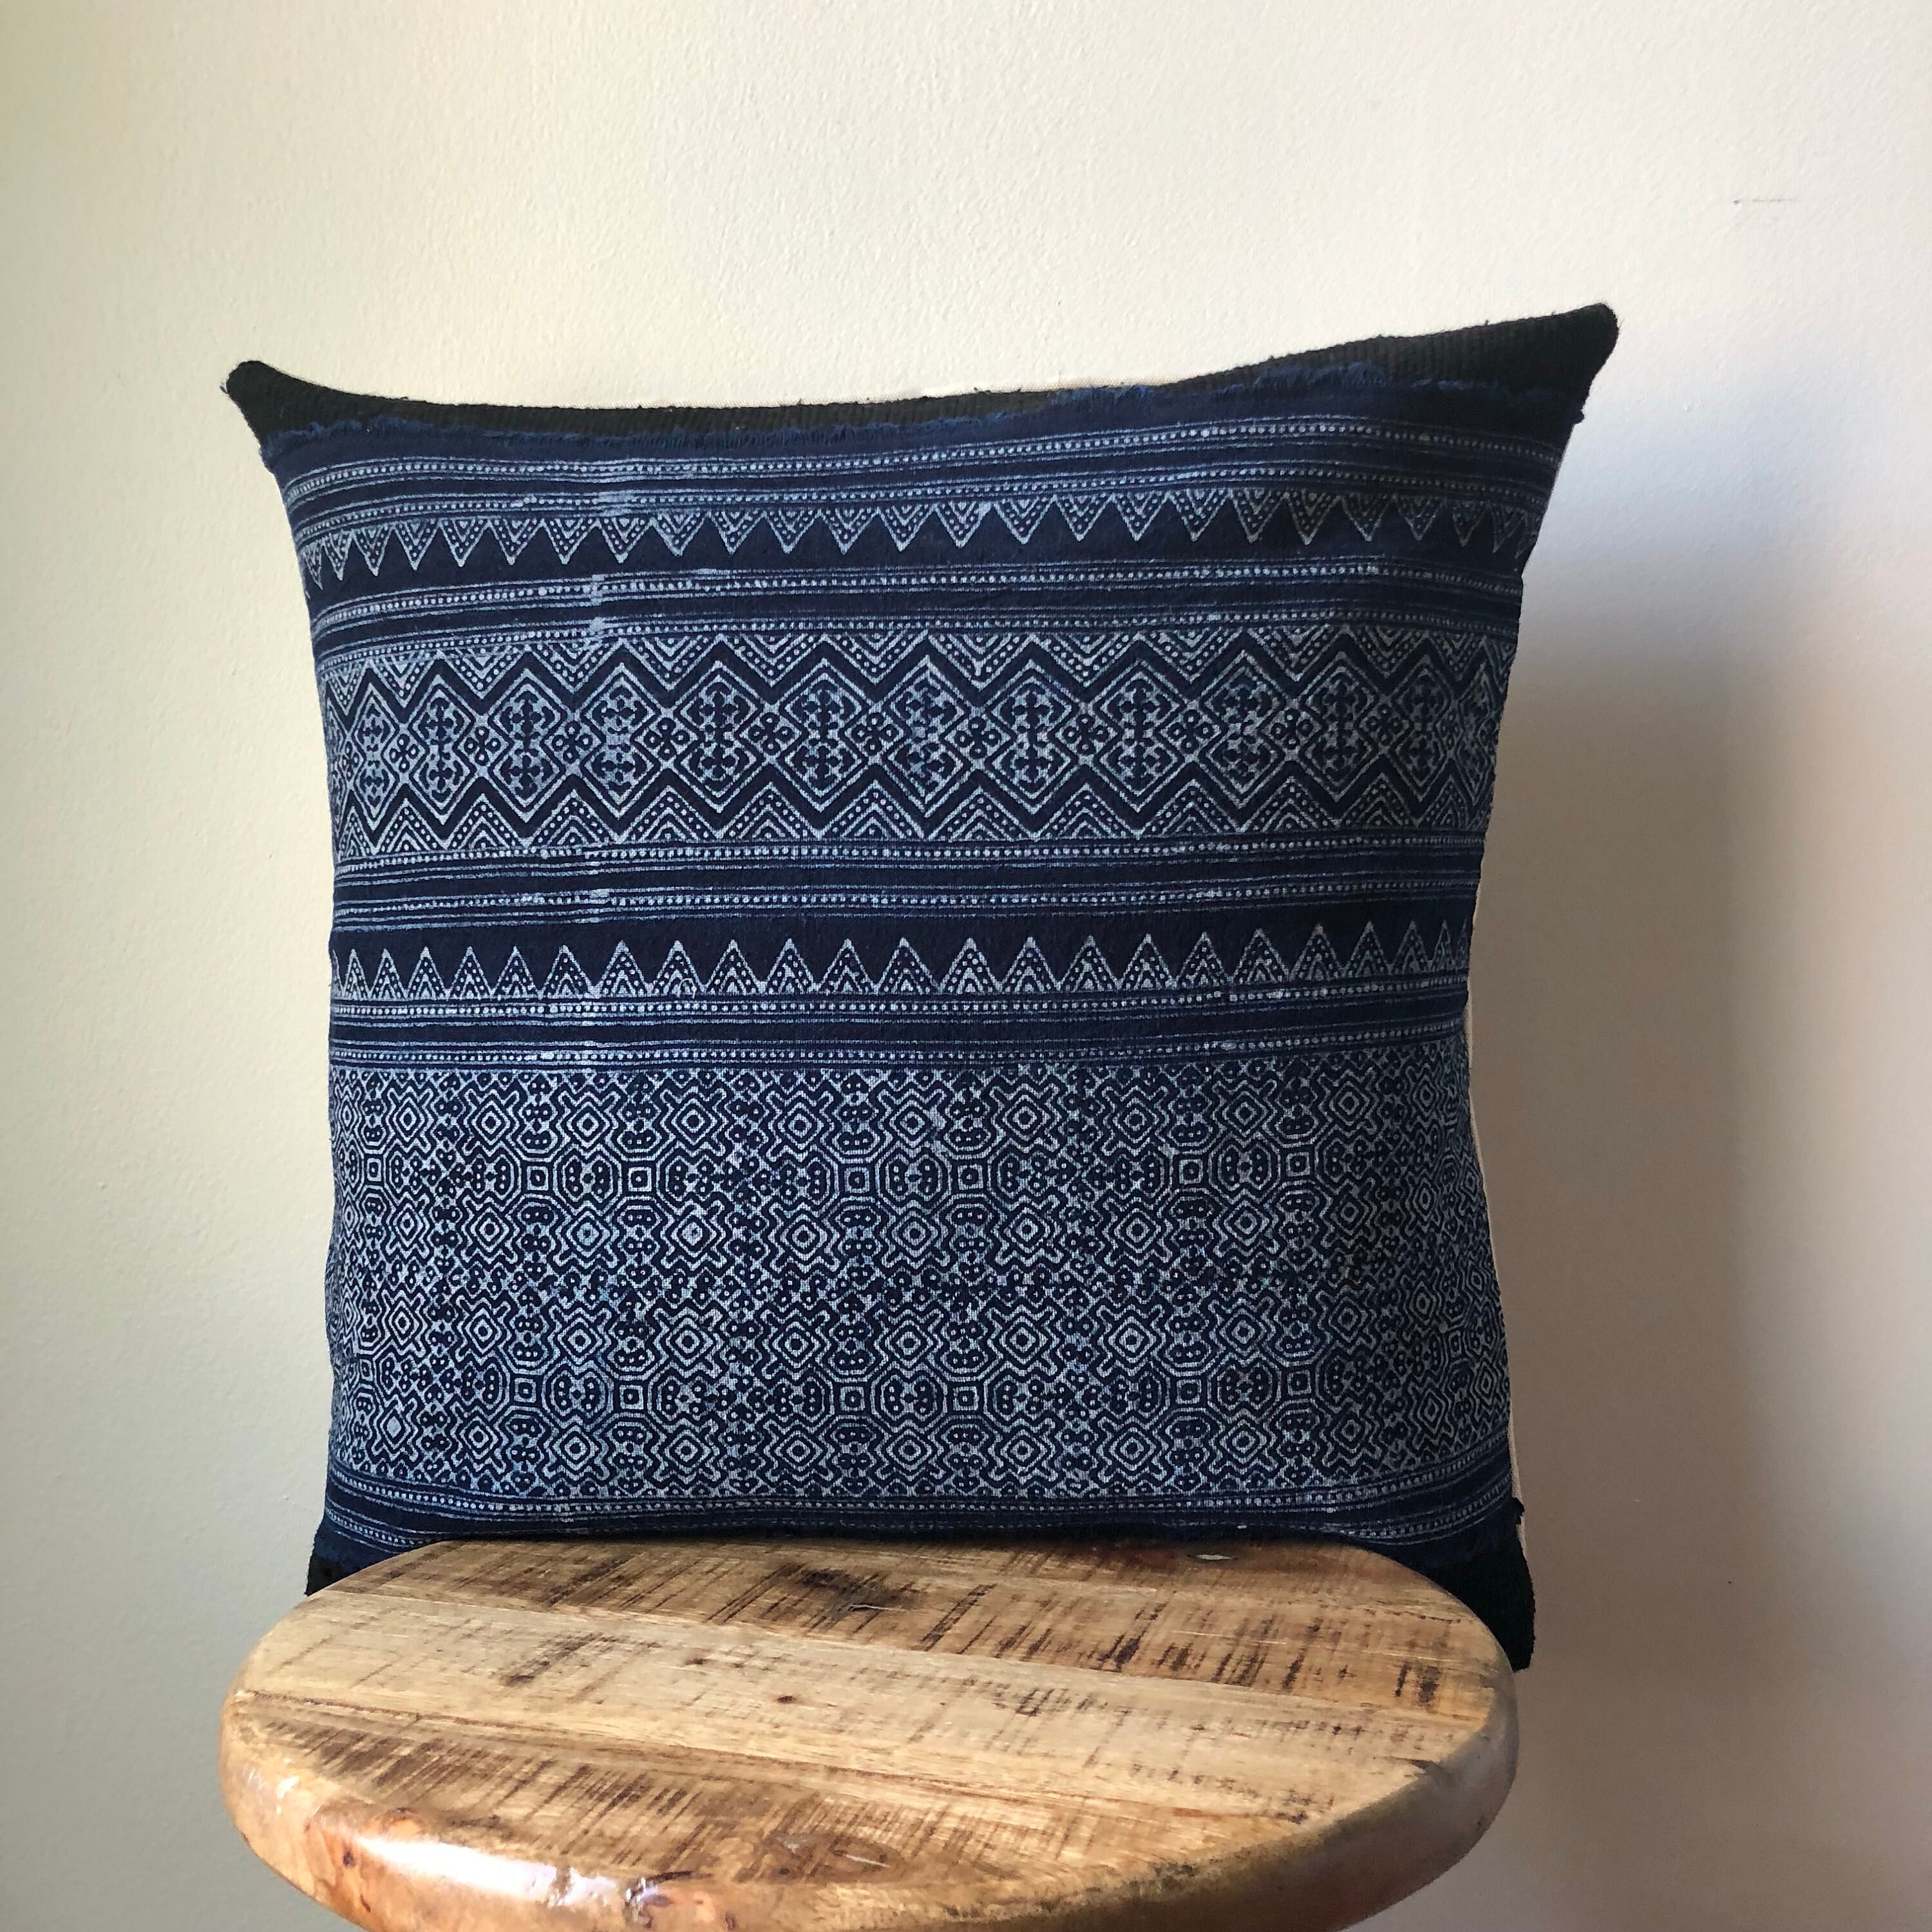 Mudcloth and Hmong Indigo and Black Tribal Pillow Cover - Etsy